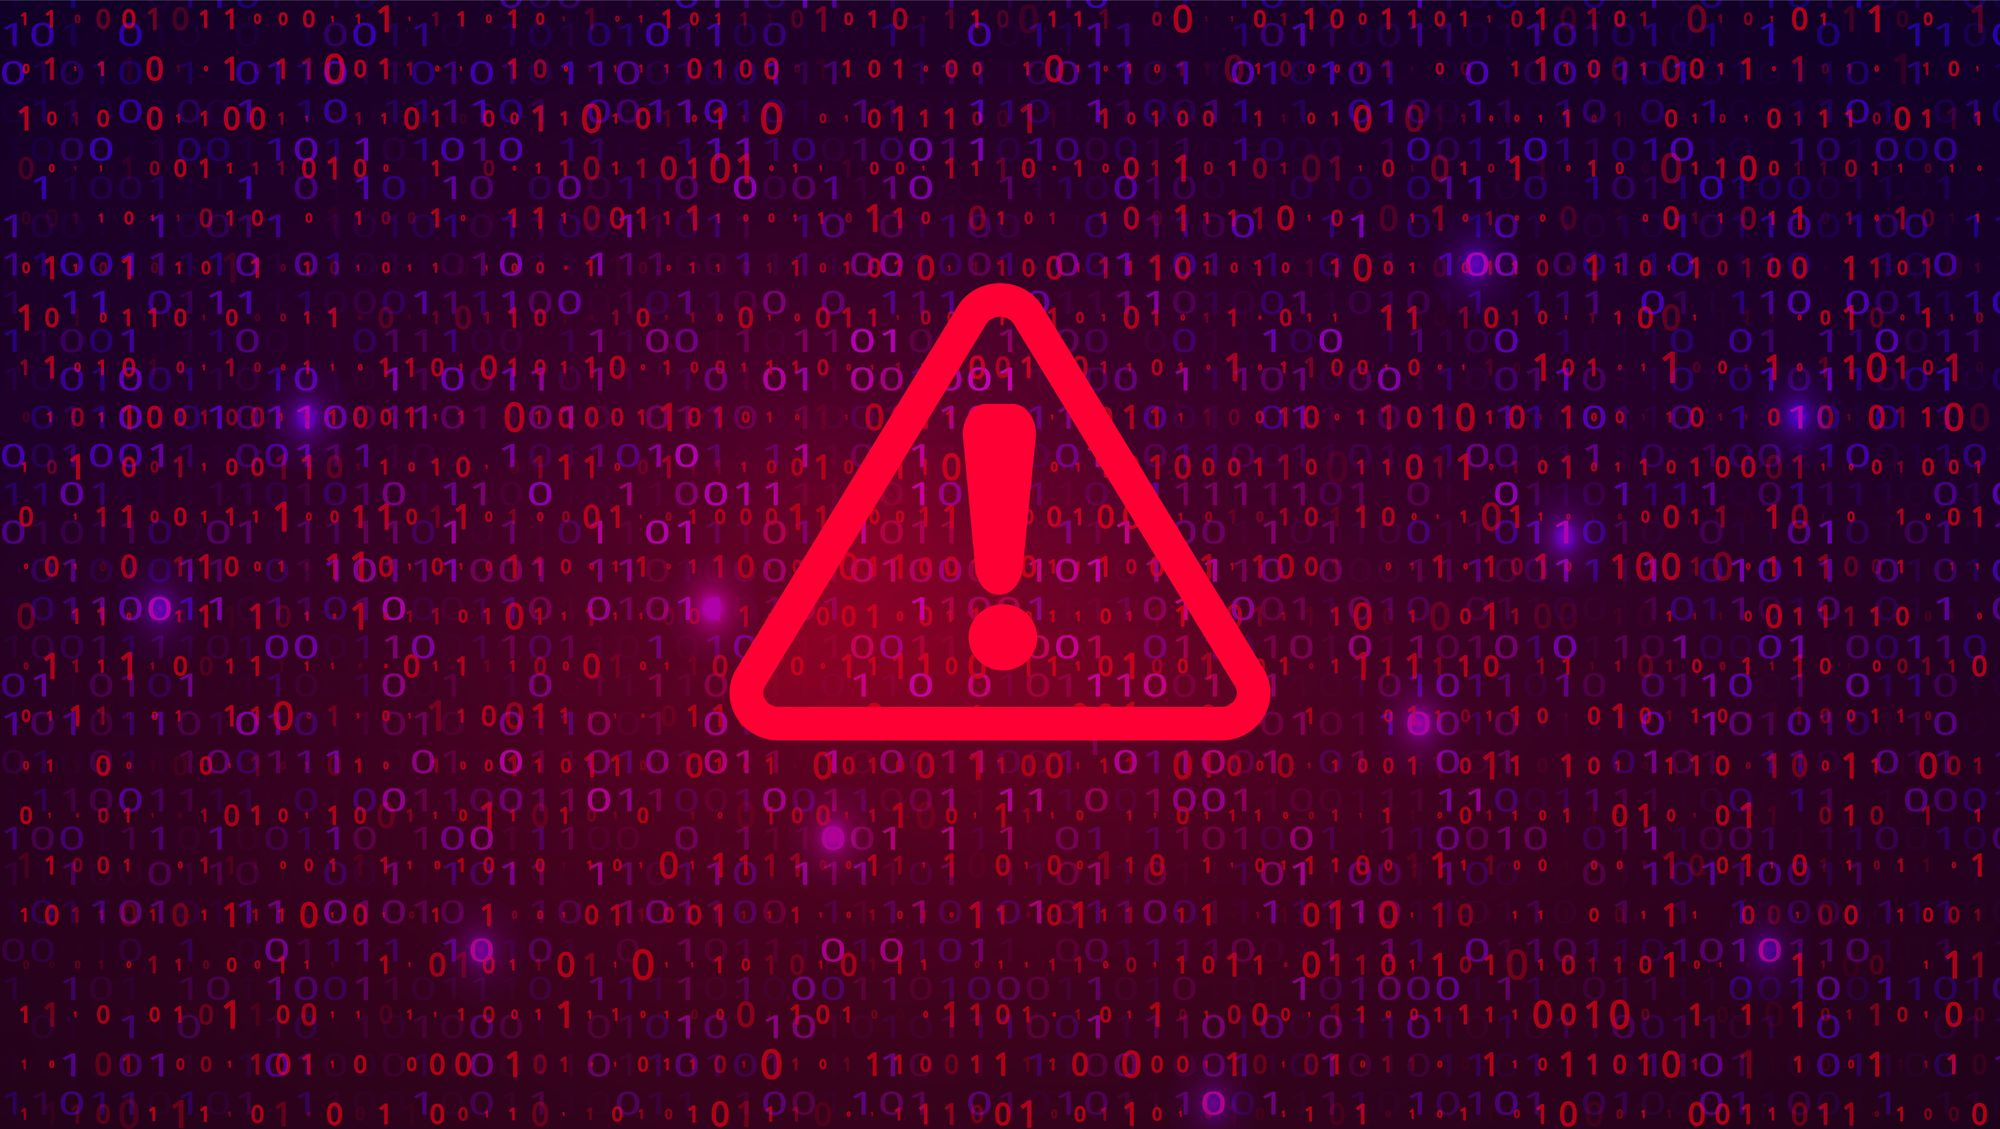 Rapid7 Observed Exploitation of Adobe ColdFusion